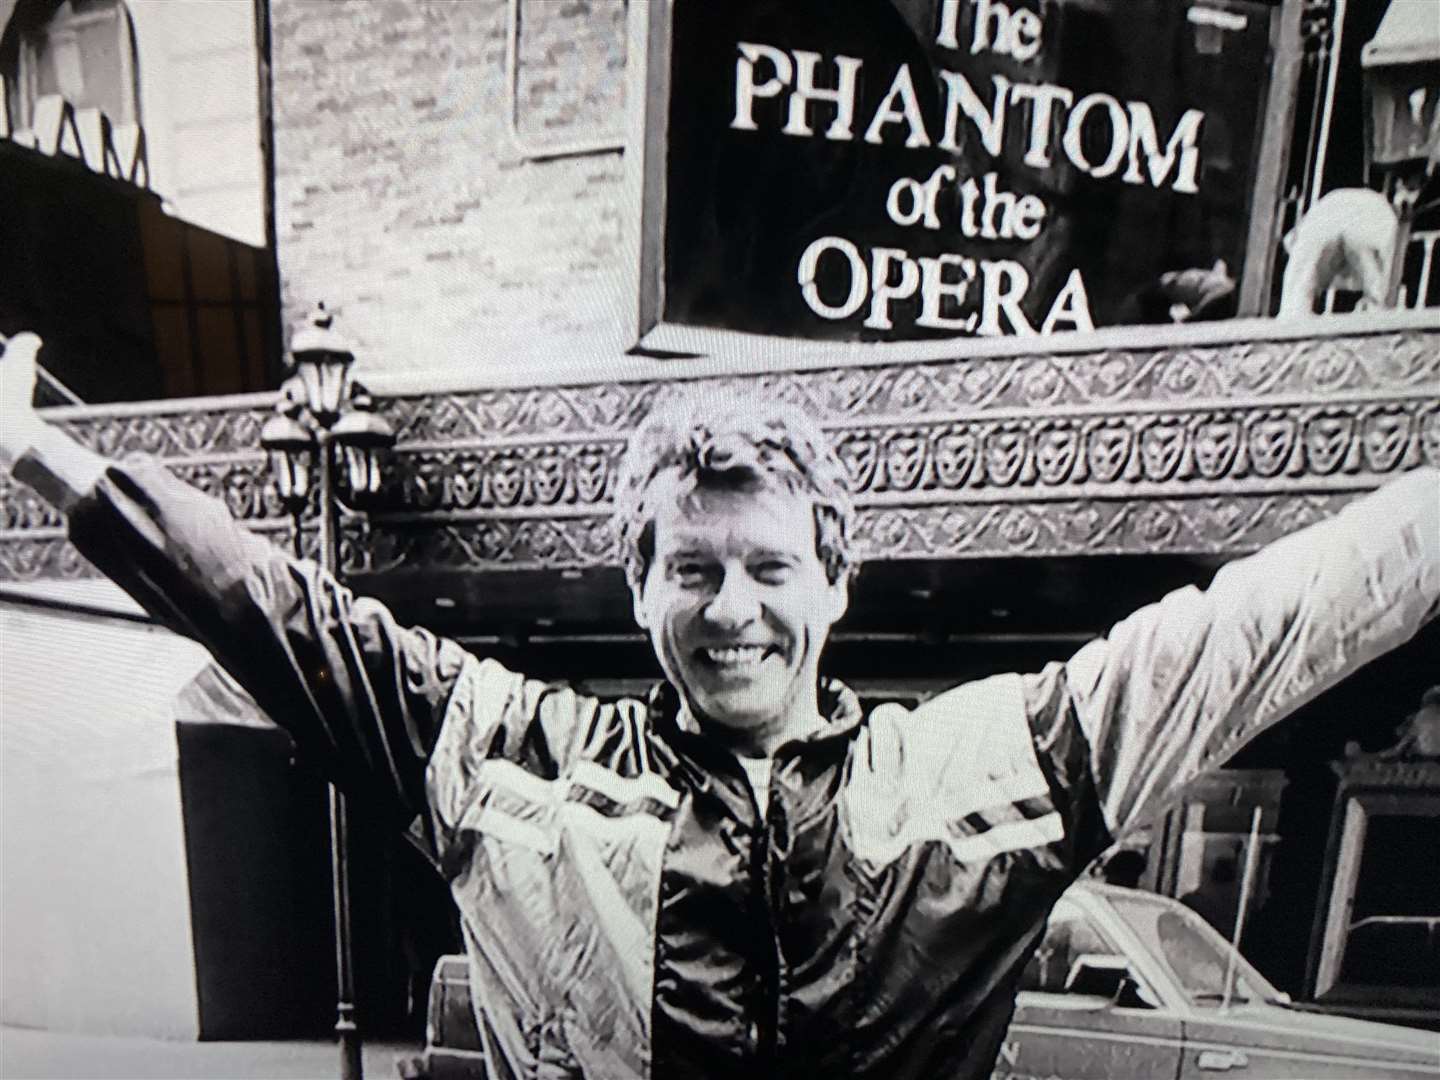 Michael Crawford outside the Phantom of the Opera. Picture: Channel 5 documentary Some Mothers Do 'Ave 'Em